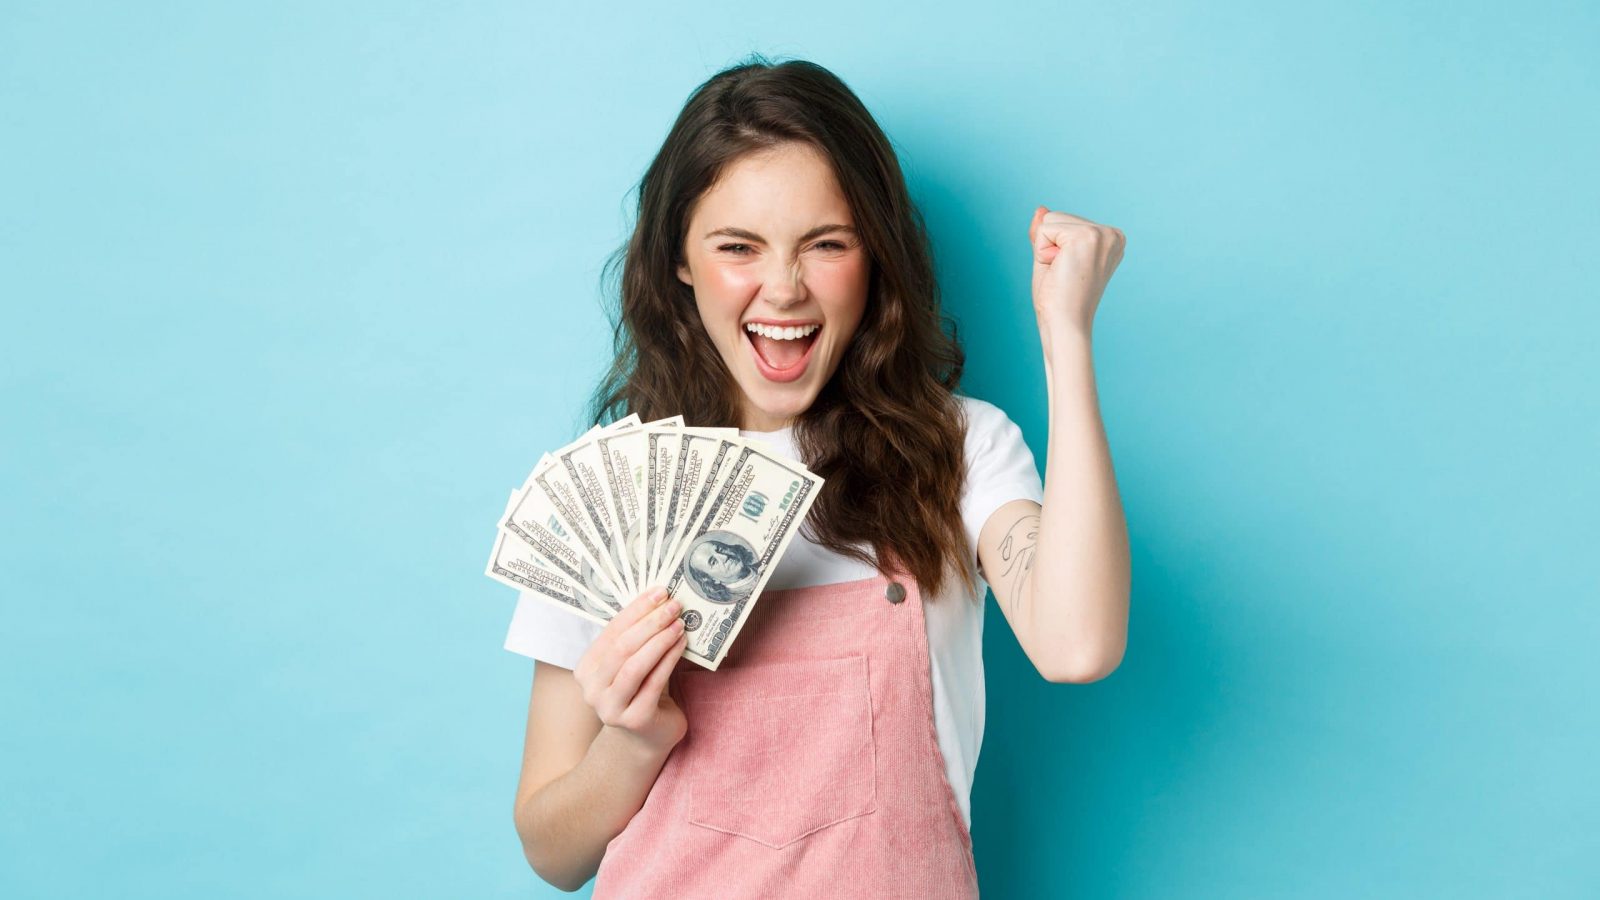 Lucky young woman looks excited, shouting from satisfaction and triumph, winning money, holding dollar bills and making fist pump, standing over blue background.